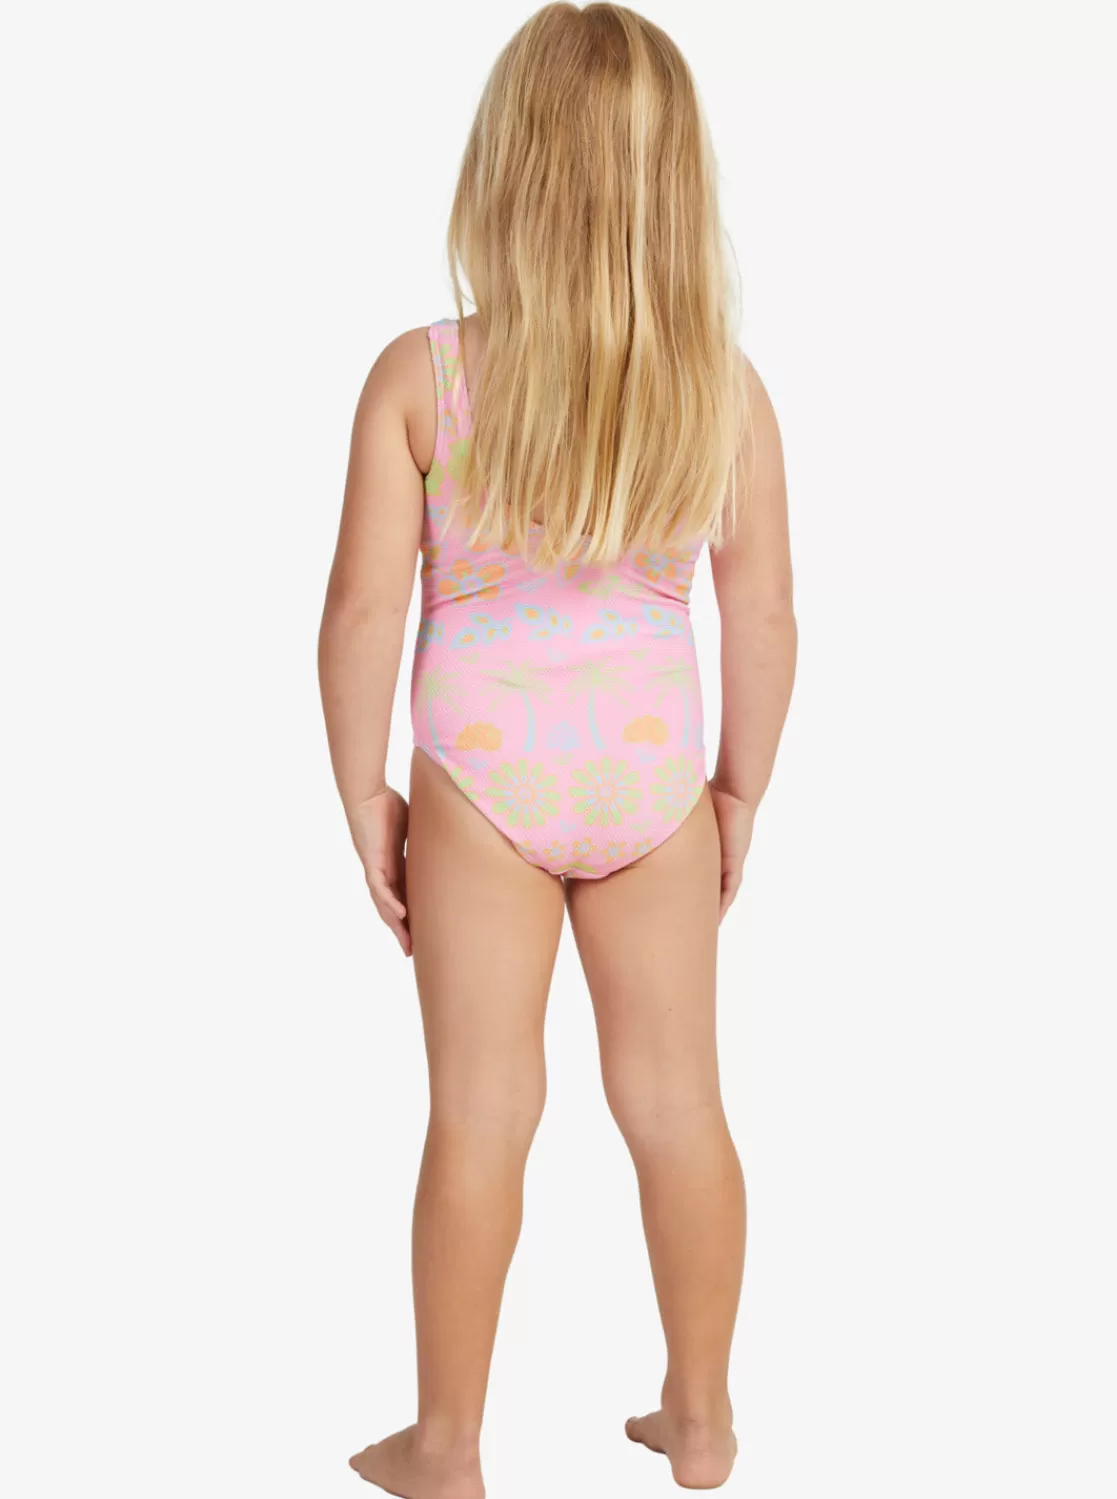 Girls 2-7 Beach Day Together One-Piece Swimsuit-ROXY Shop